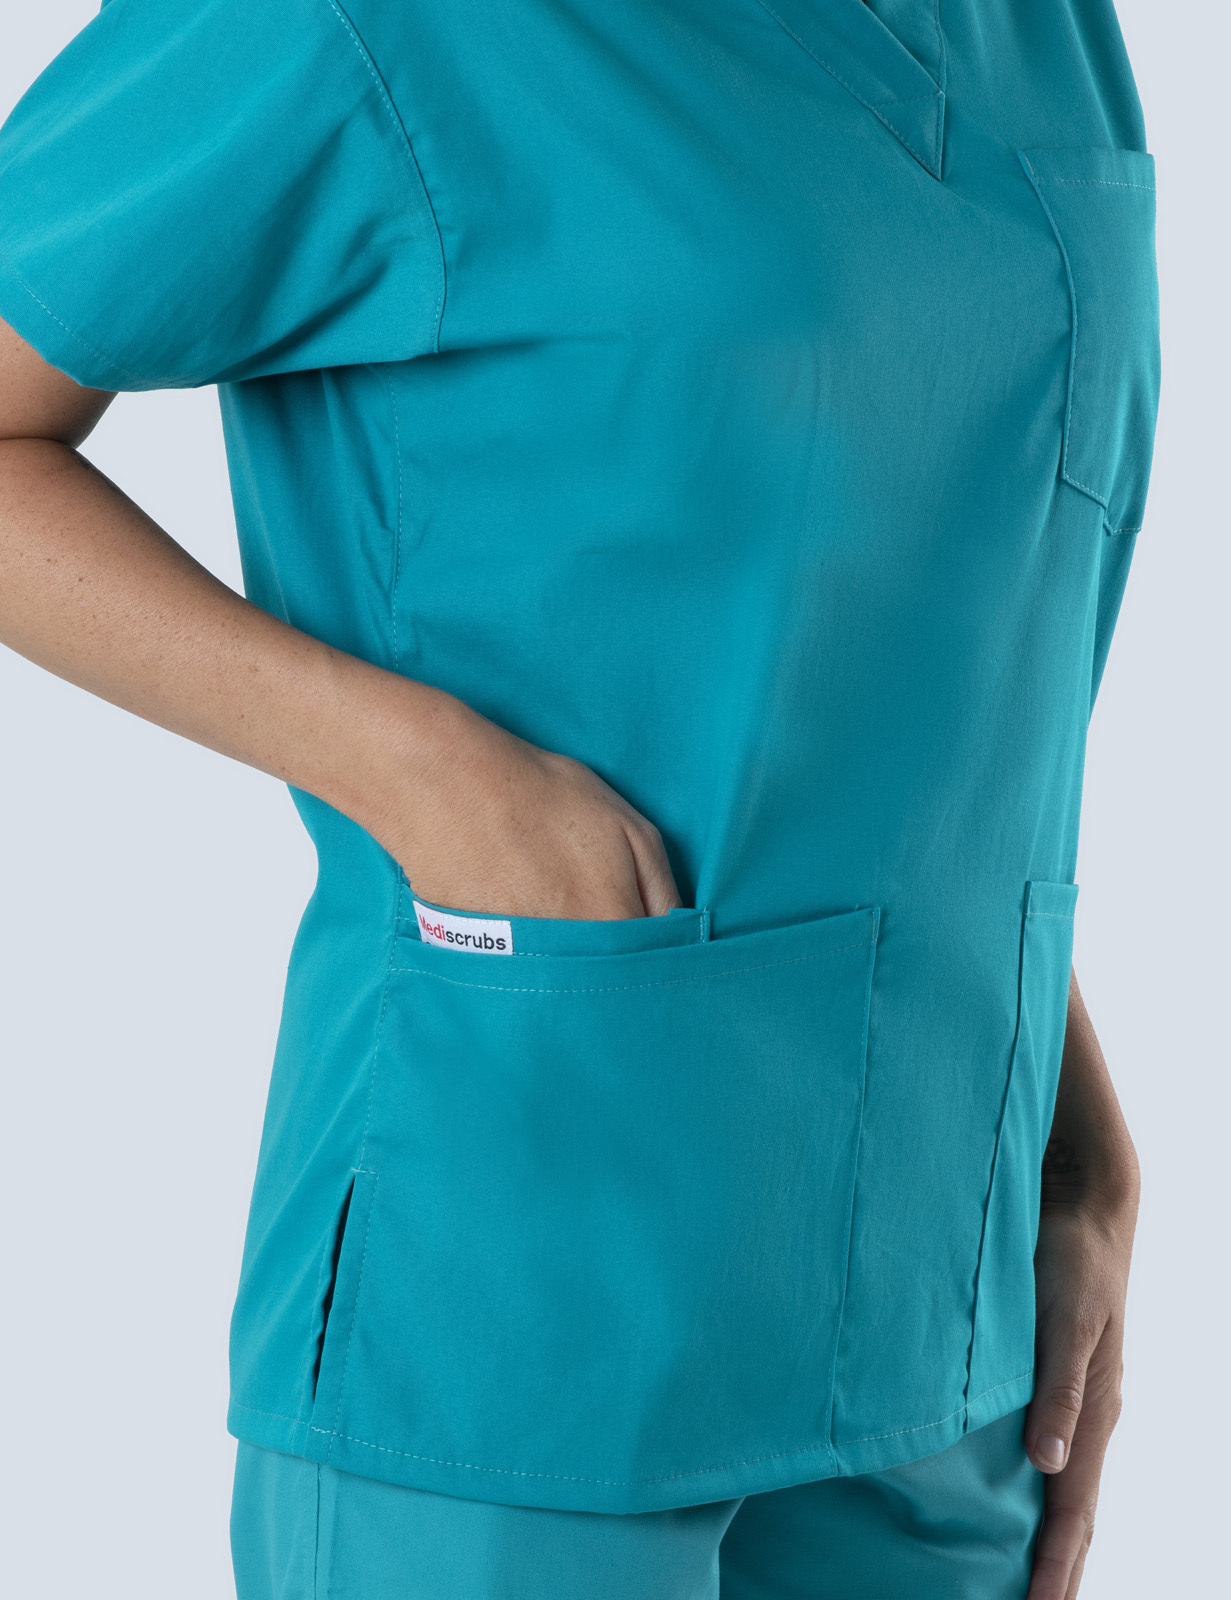 Toowoomba Hospital - Doctor (4 Pocket Scrub Top and Cargo Pants in Teal incl Logos)